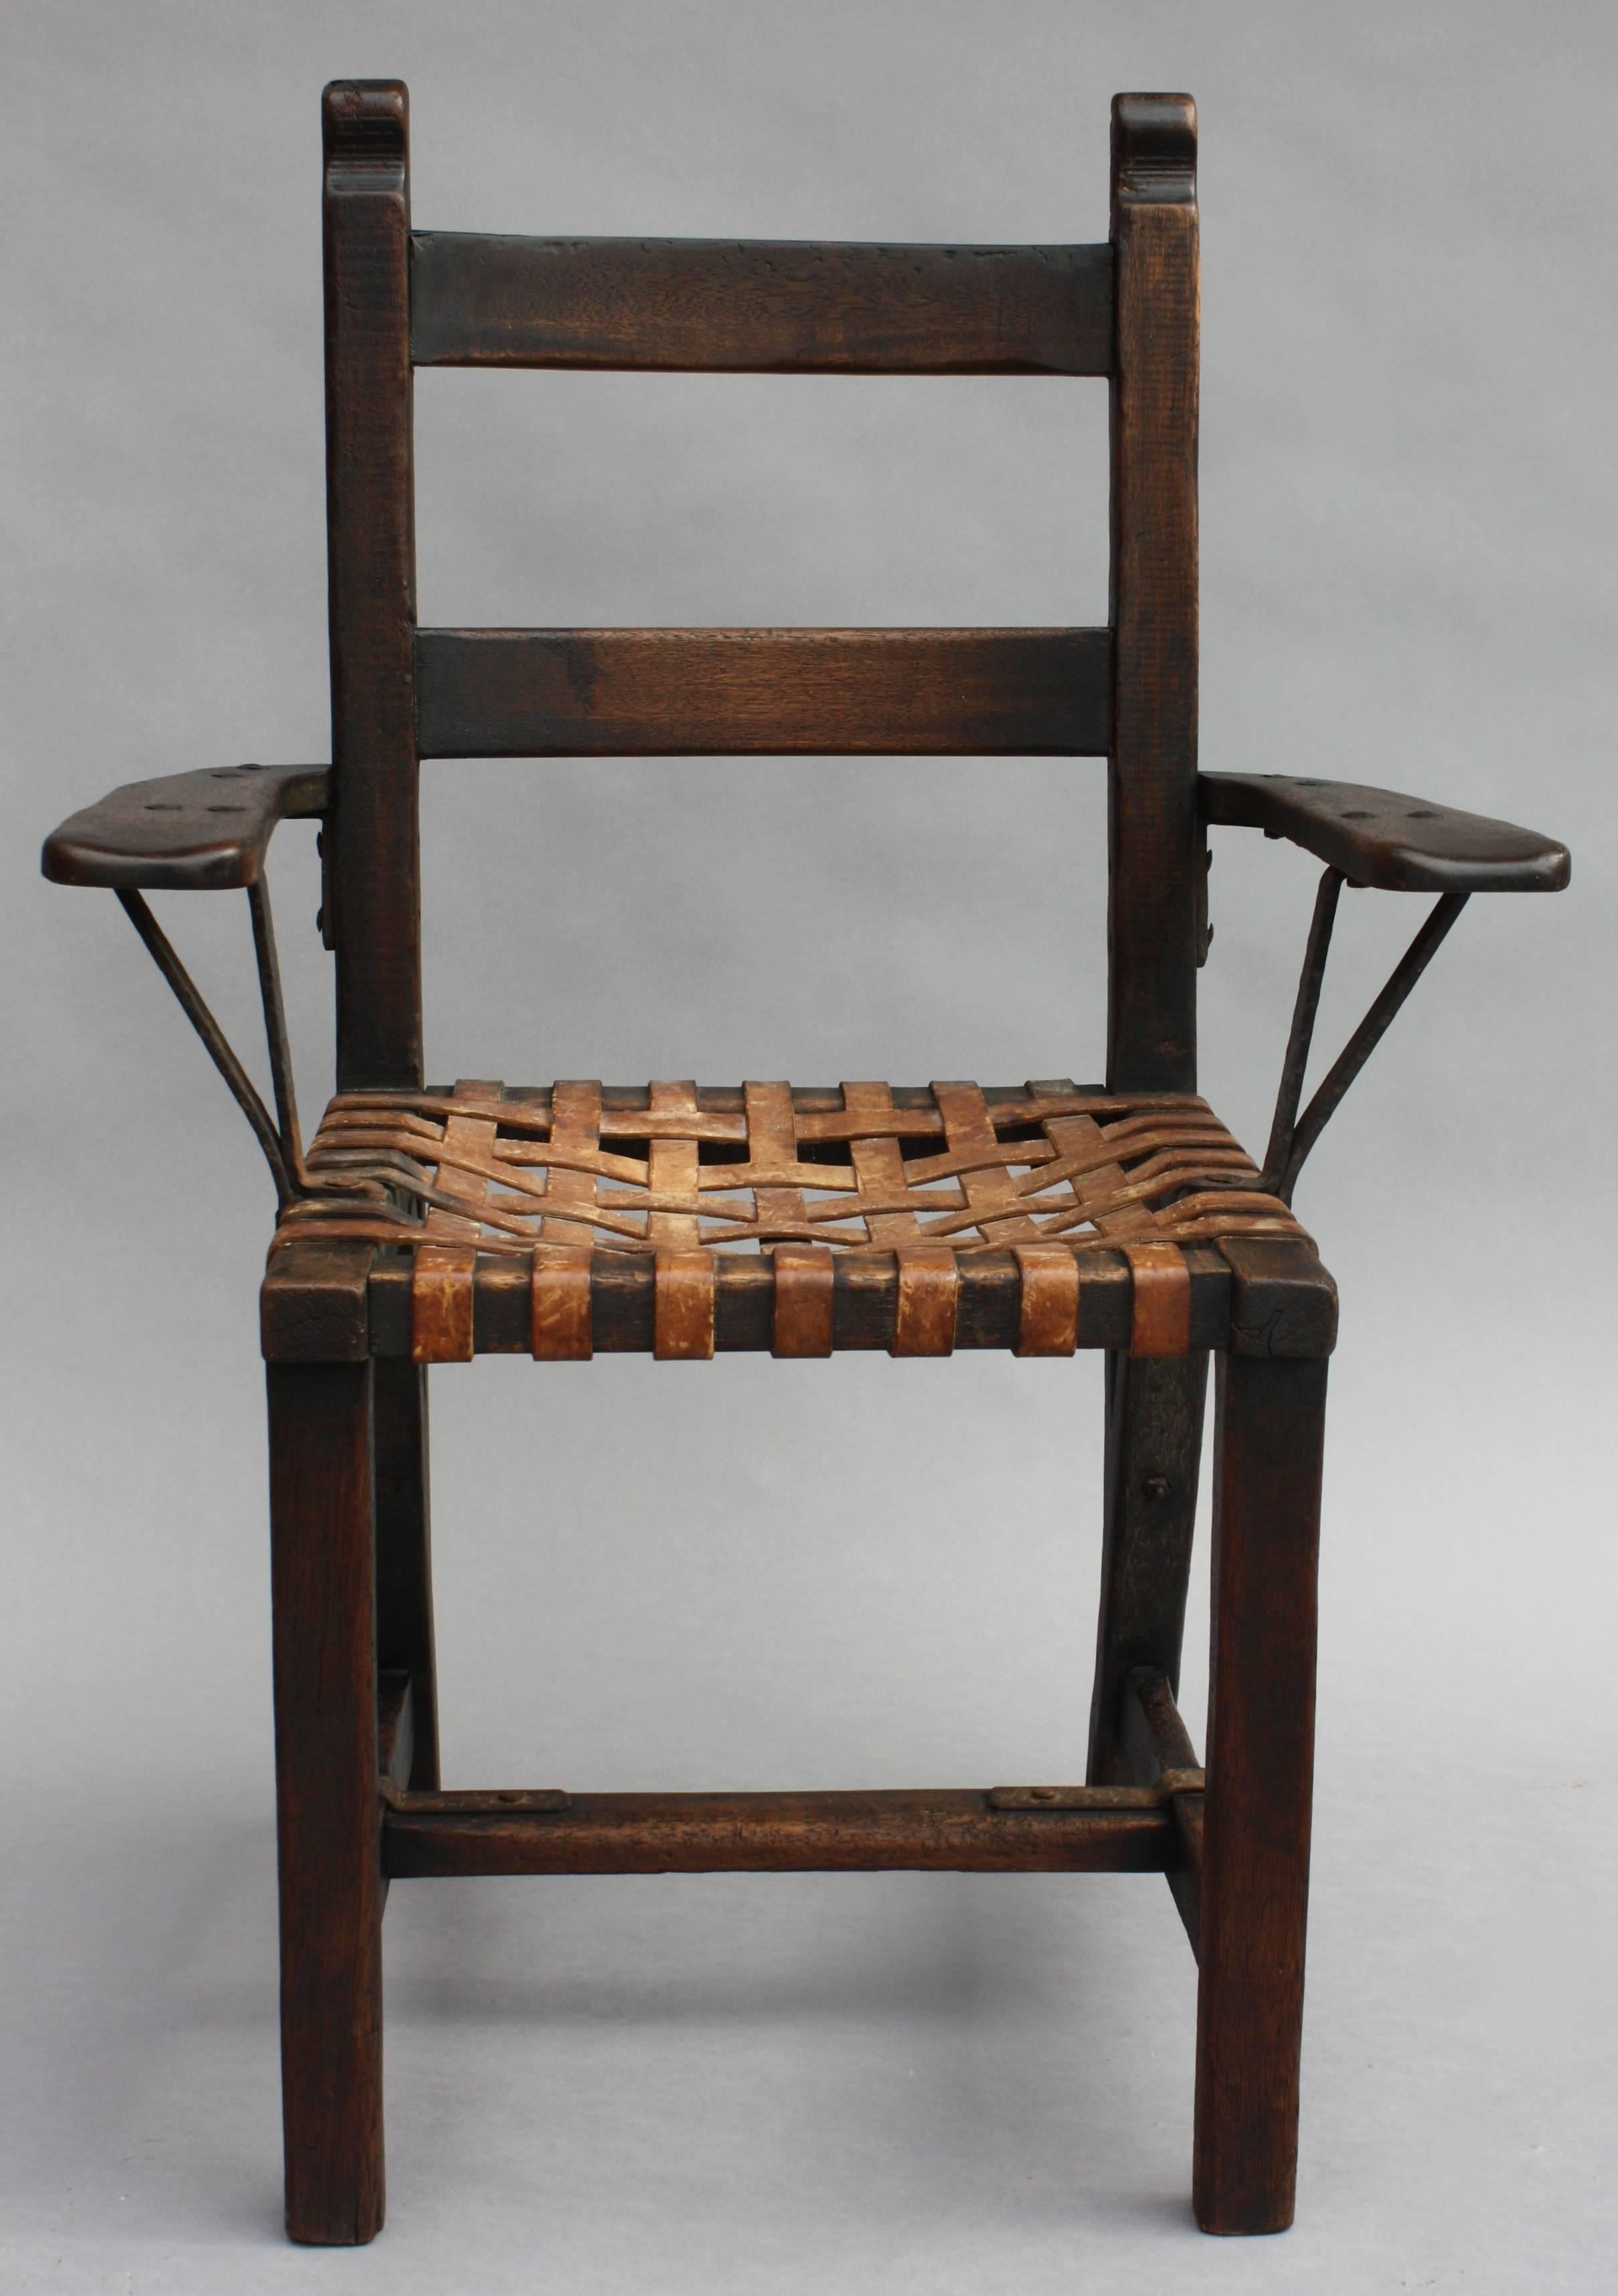 Wonderful Monterey period chair with original woven leather strap seat and iron strapping.